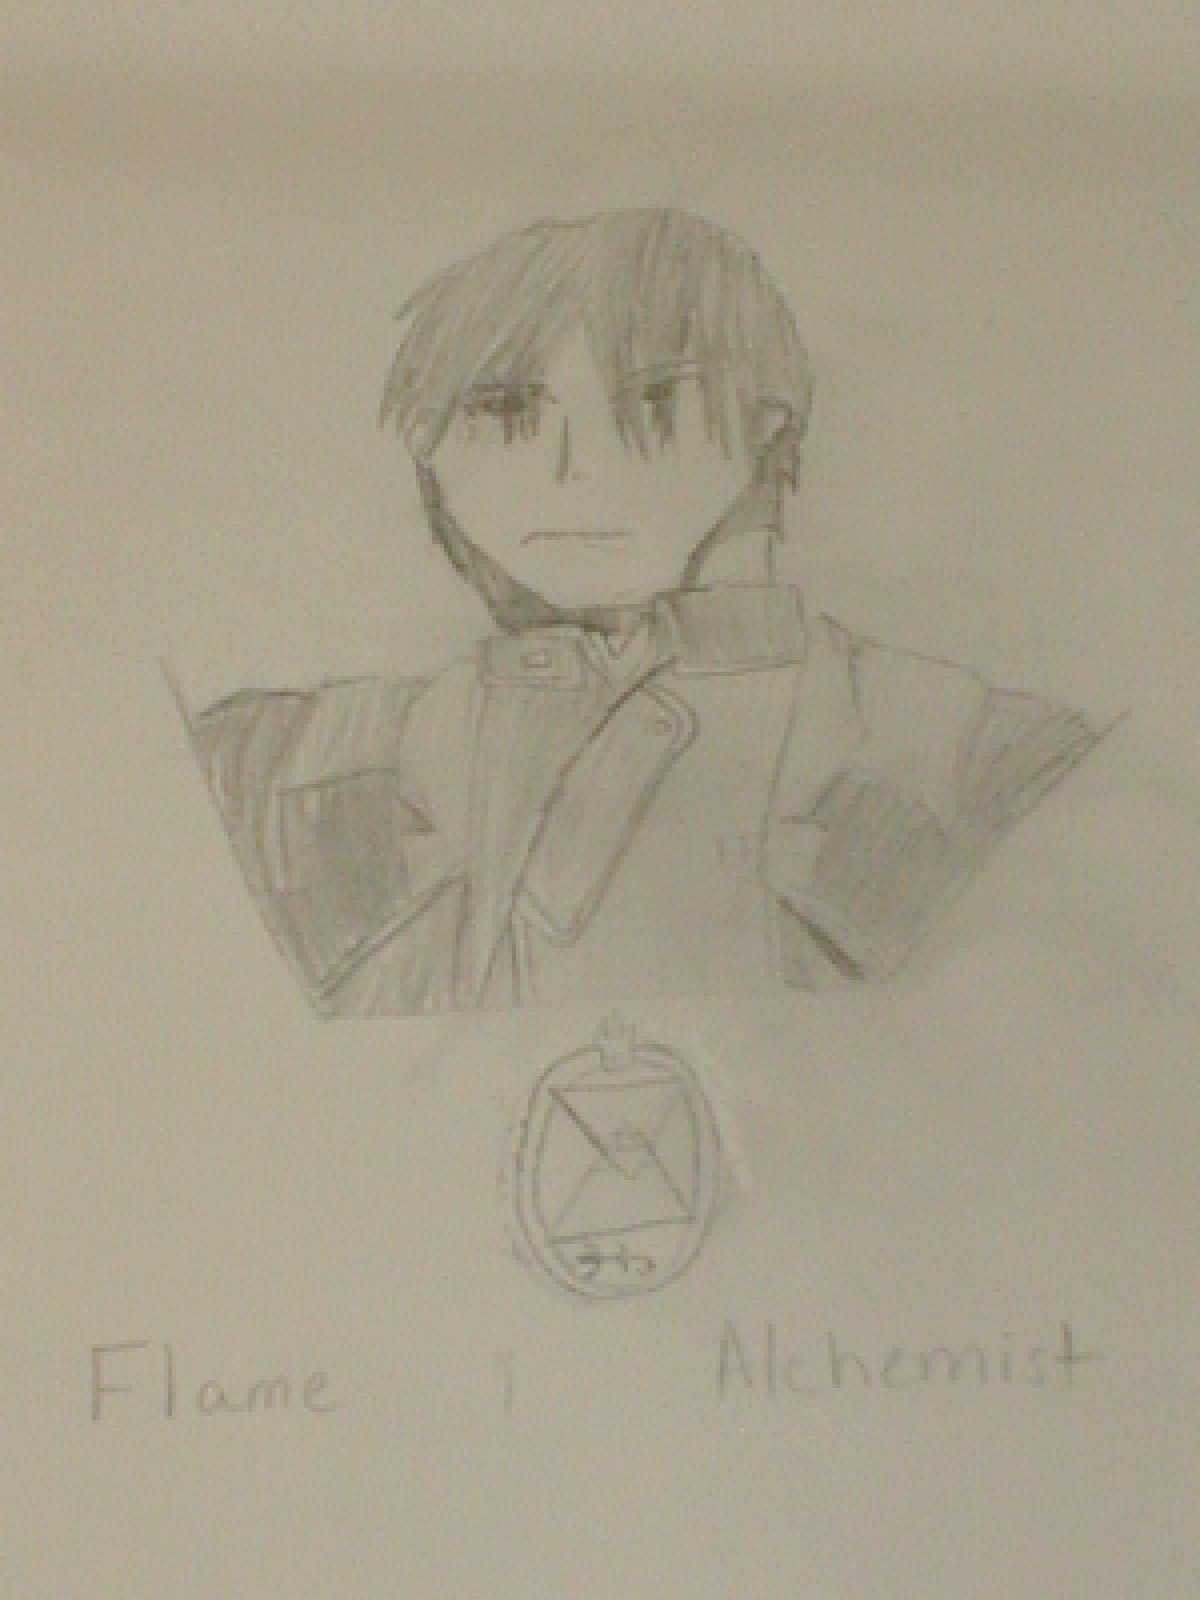 Roy Mustang by inventor